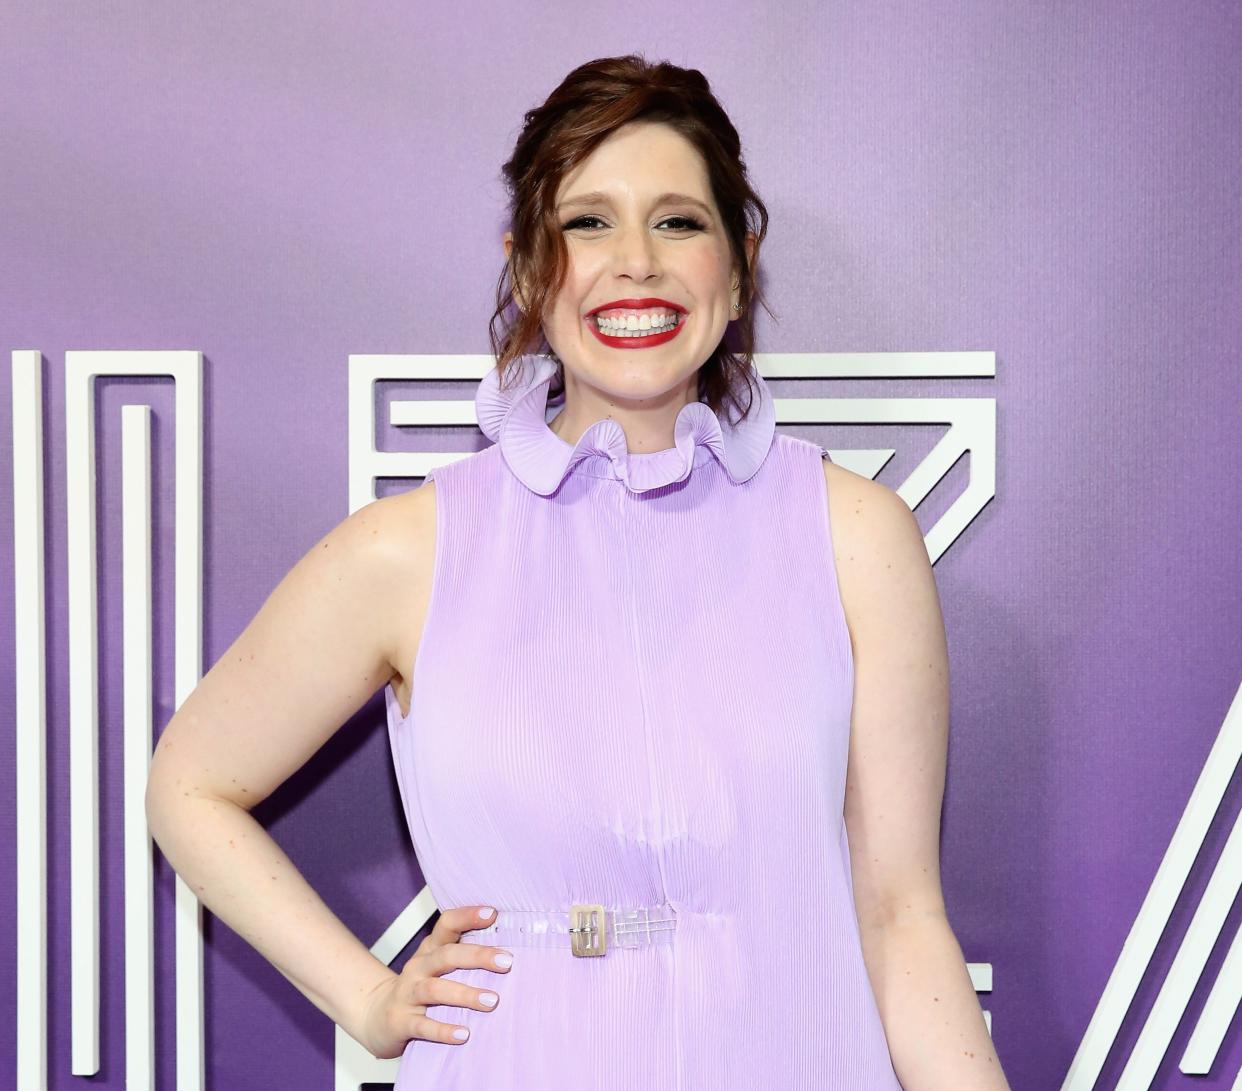 Vanessa Bayer attends the premiere of the Netflix film "Ibiza" last May in New York. (Photo: Monica Schipper via Getty Images)